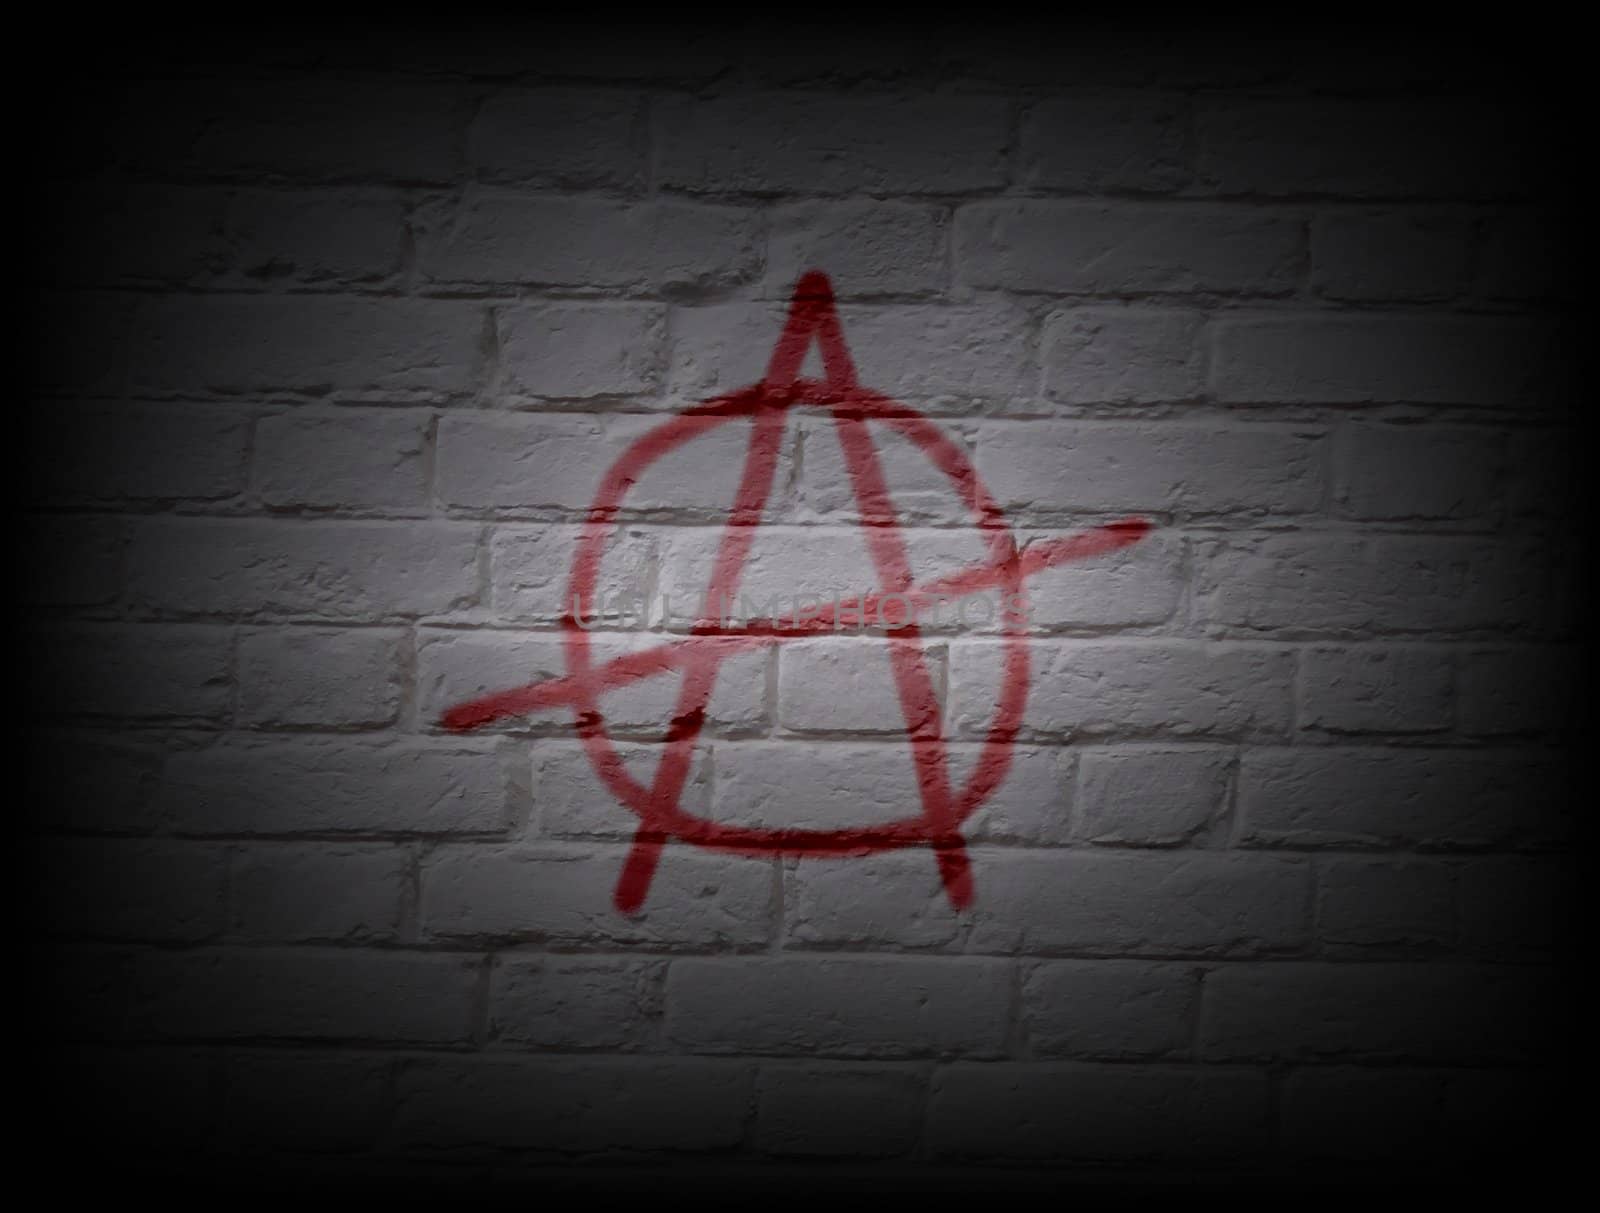 Illustration of an anarchy symbol on a white wall